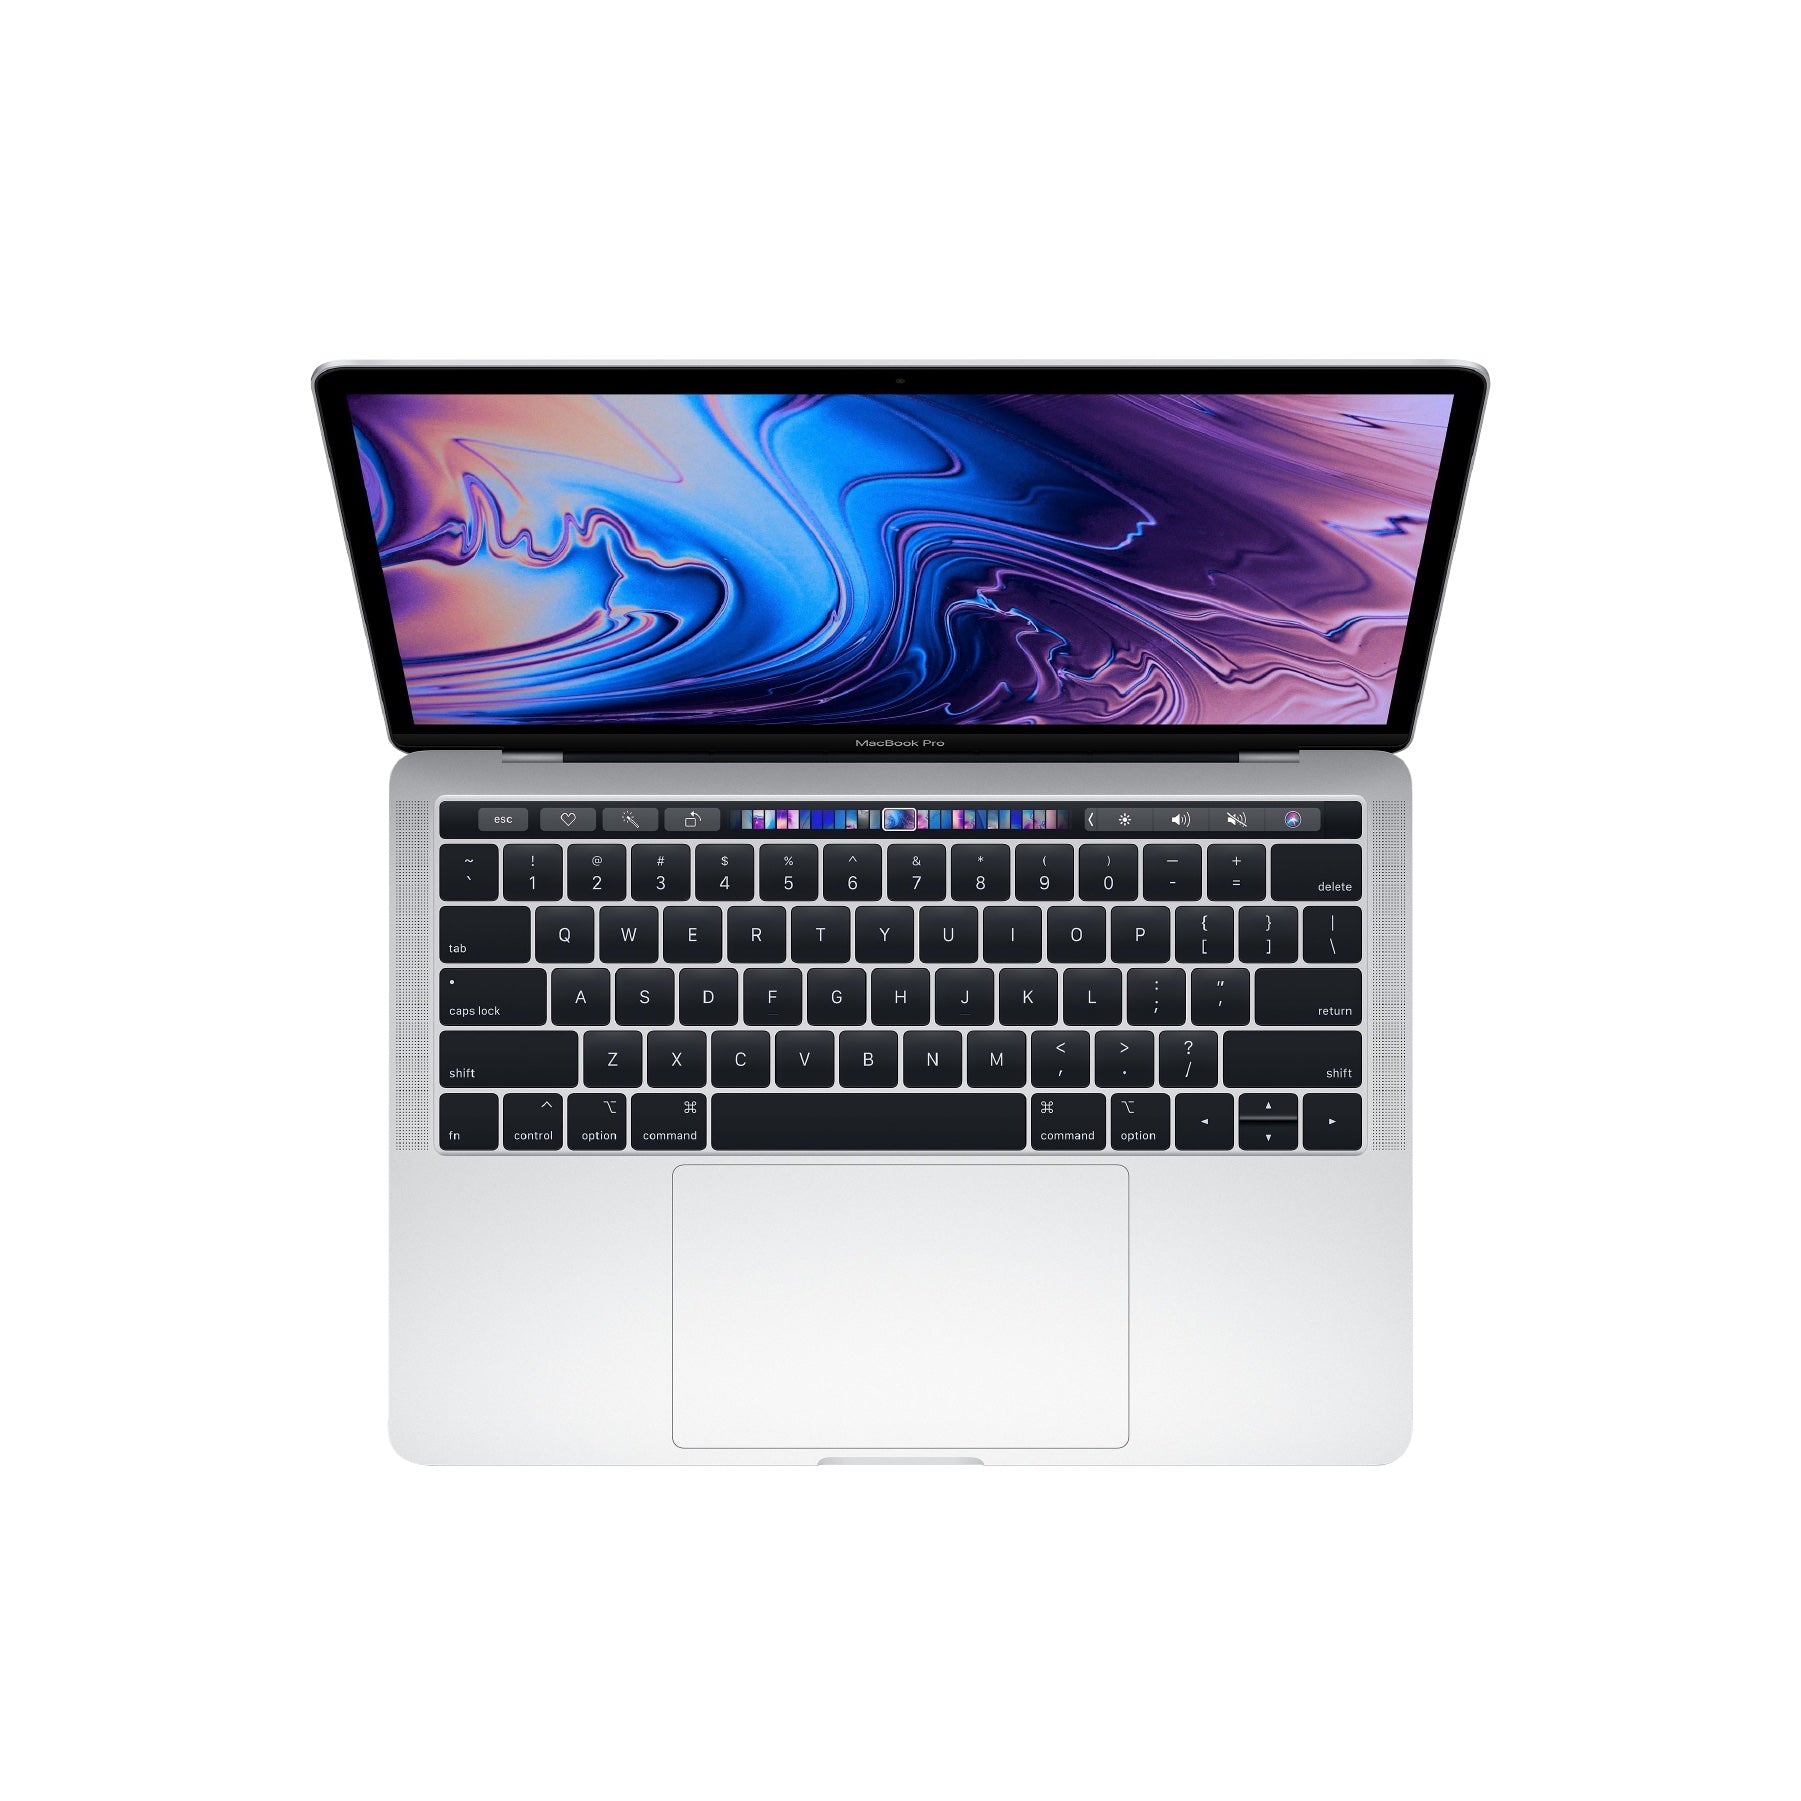 MacBook Pro (13-inch, 2019, Four Thunderbolt 3 ports) 2.4GHz, Intel Core i5 512GB - Silver (Best) - iStore Pre-owned